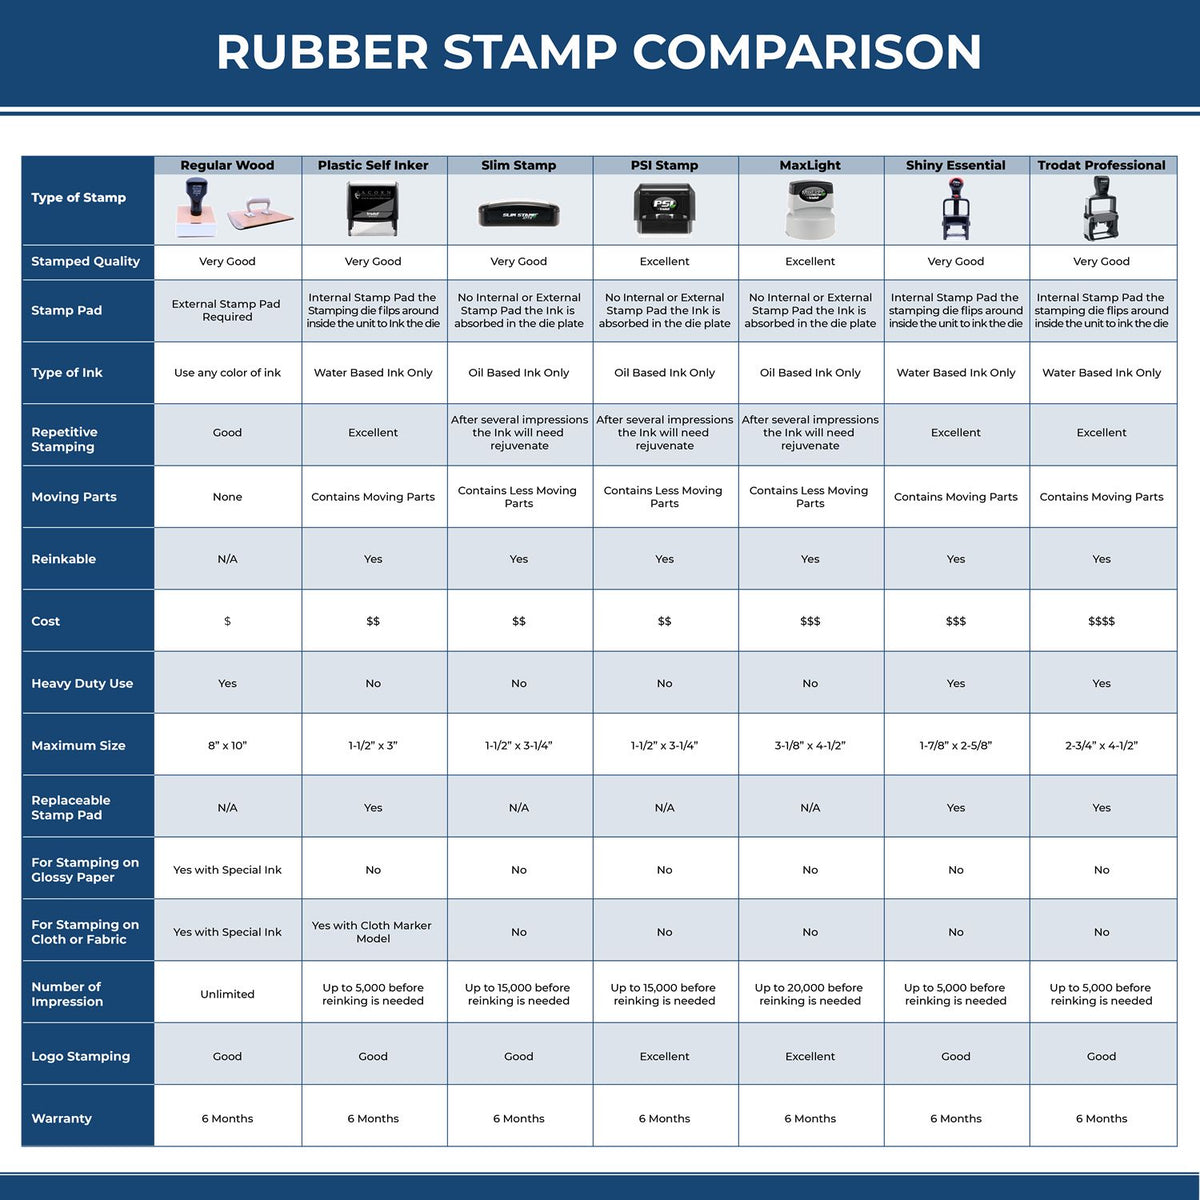 No Homework Turned In Rubber Stamp 4401R Rubber Stamp Comparison